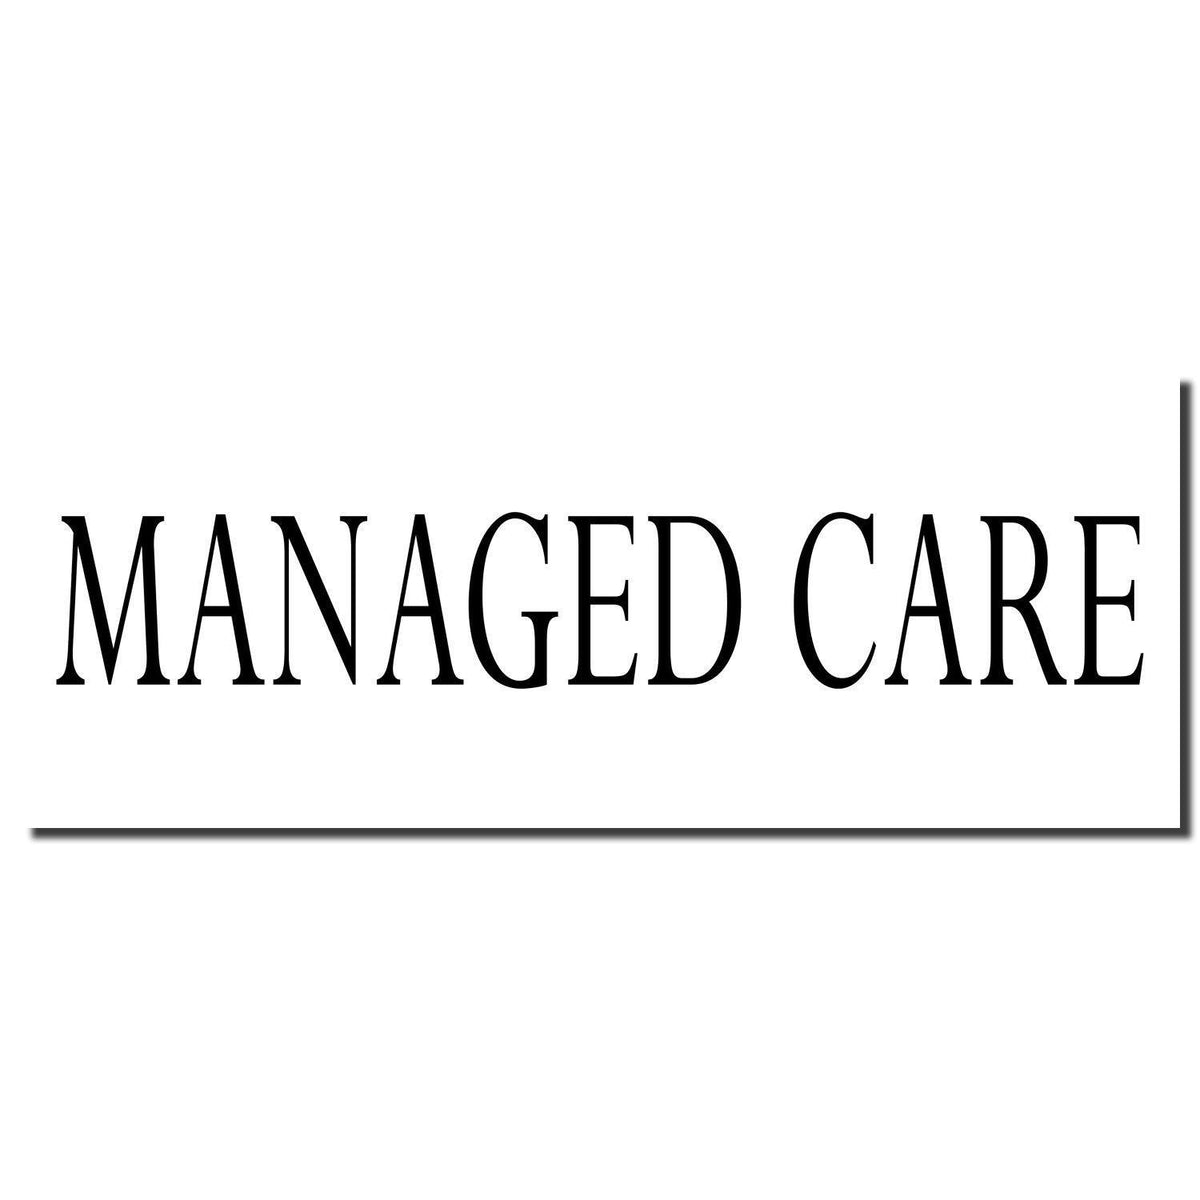 Managed Care Rubber Stamp - Engineer Seal Stamps - Brand_Acorn, Impression Size_Small, Stamp Type_Regular Stamp, Type of Use_Medical Office